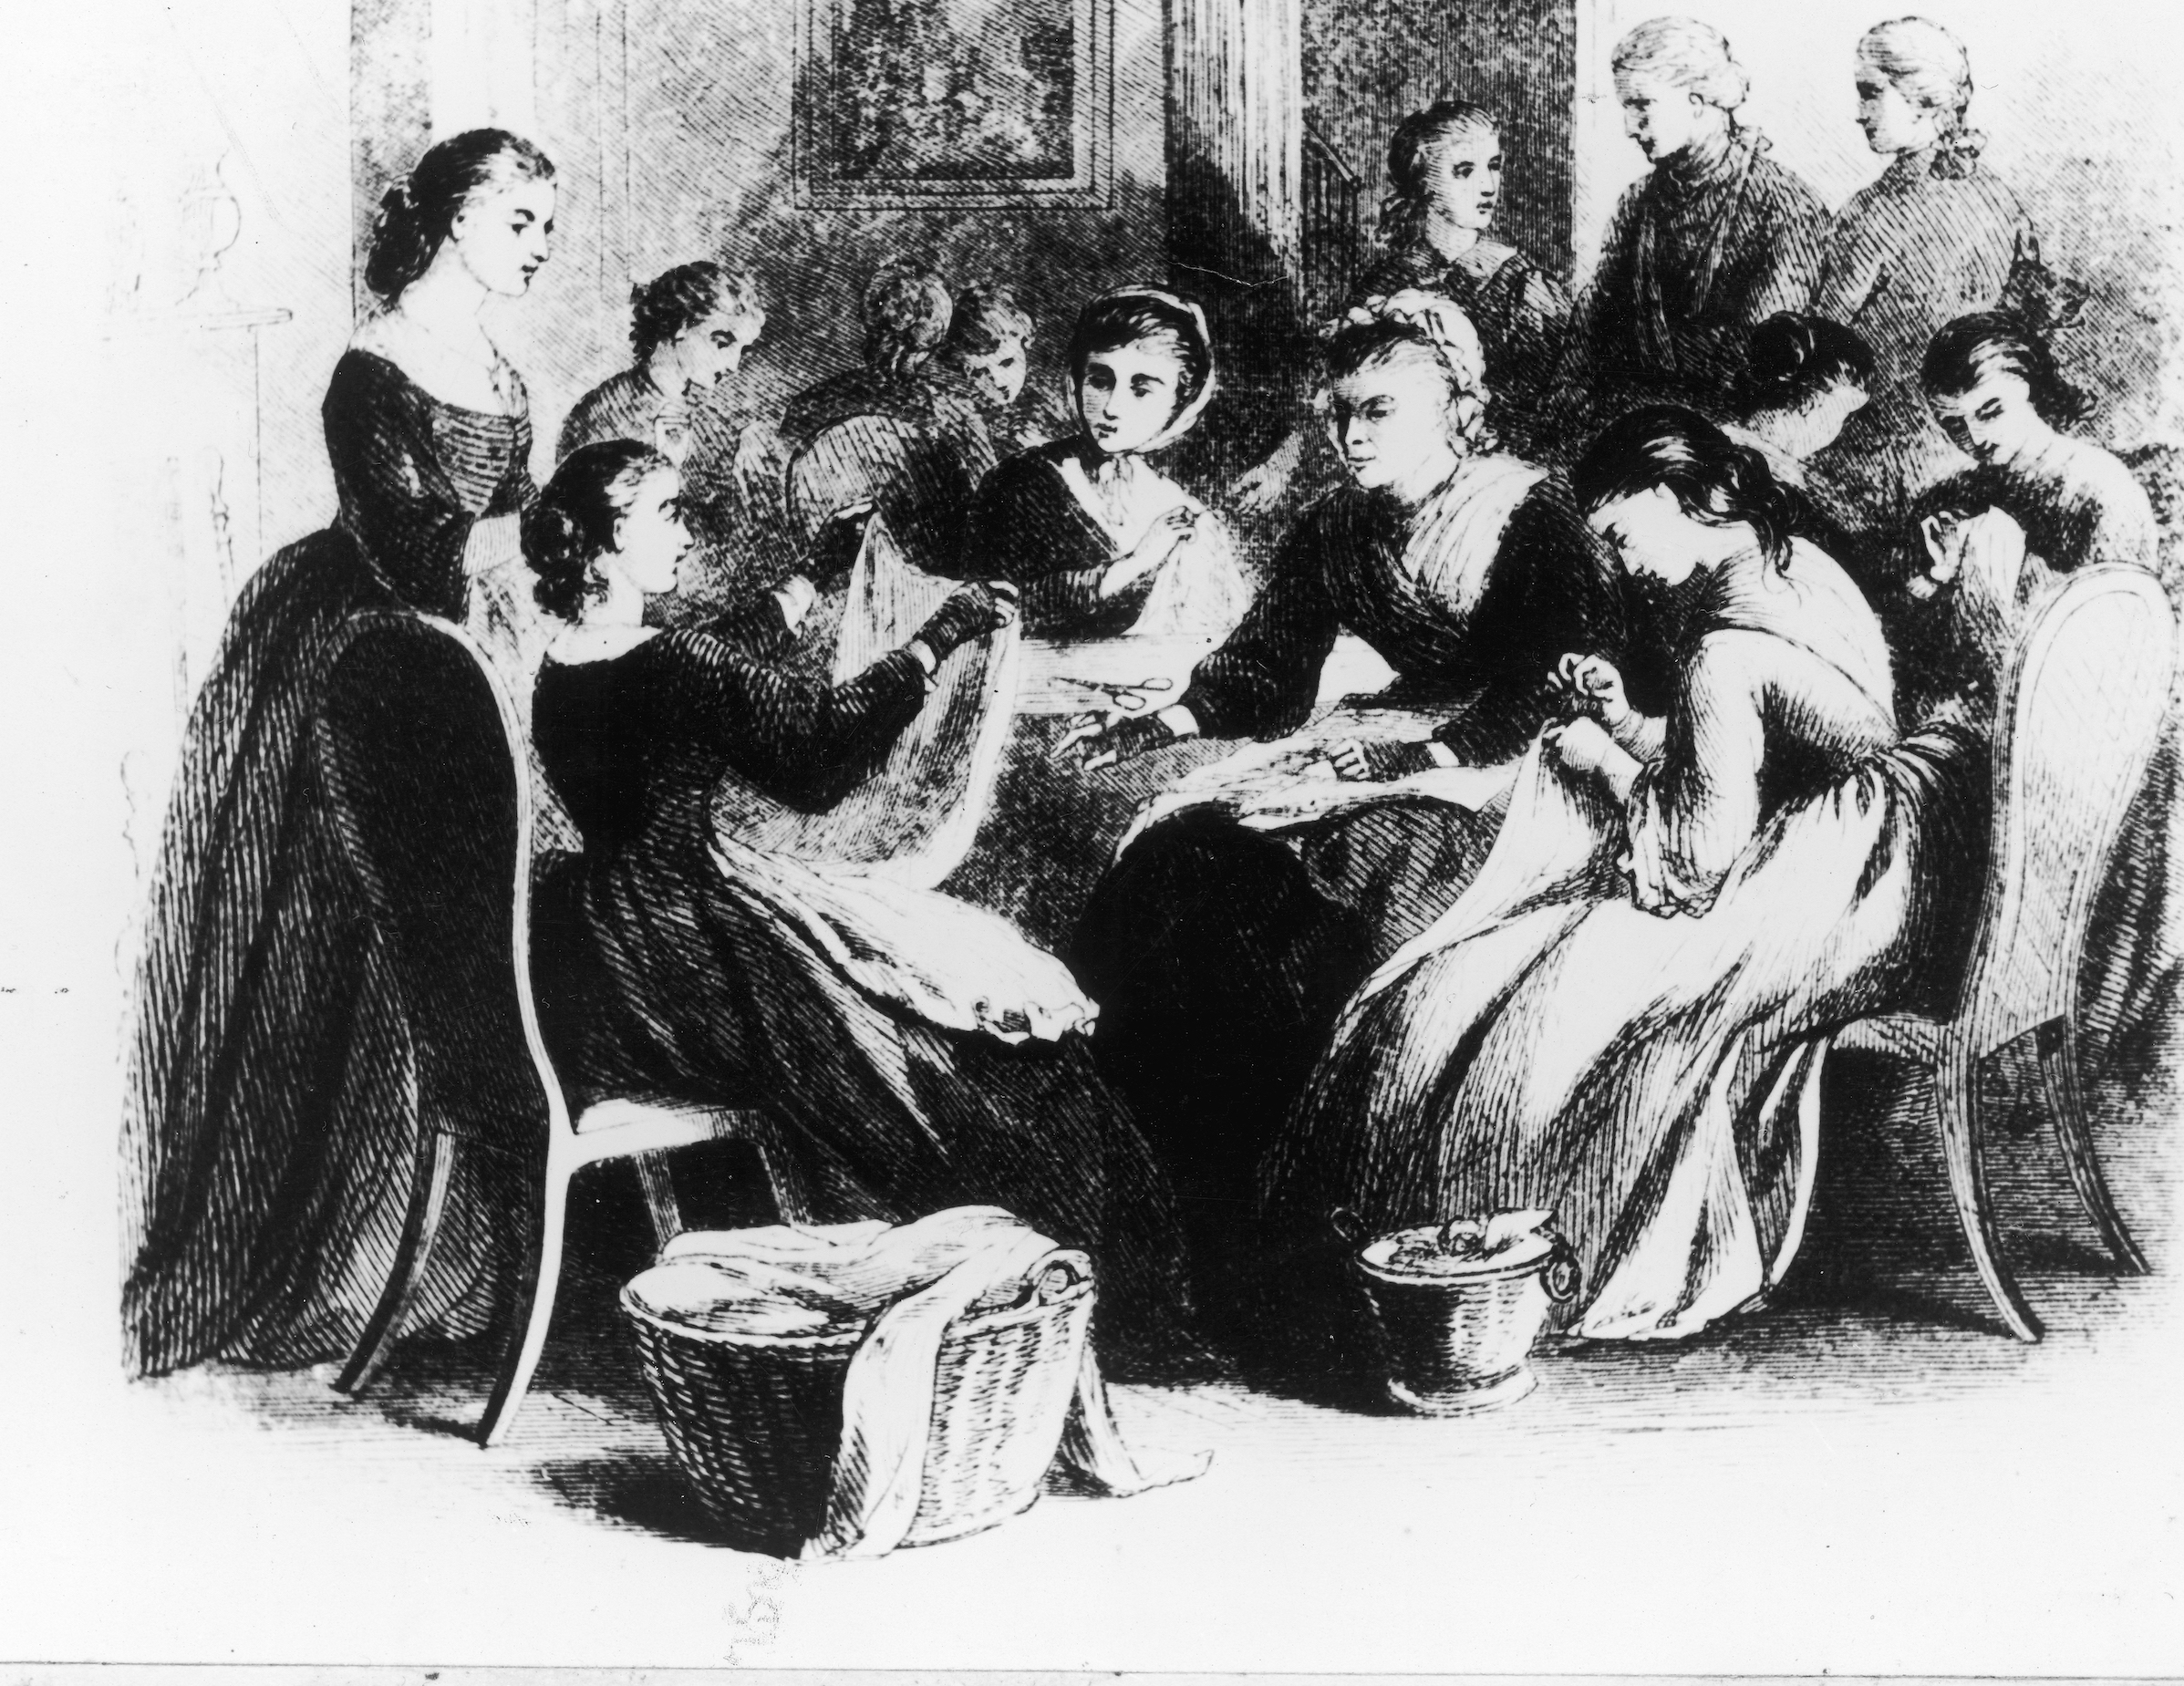 Woodcut depicting the ladies of Philadelphia working for Washington's Army, in 1780. (Getty Images)